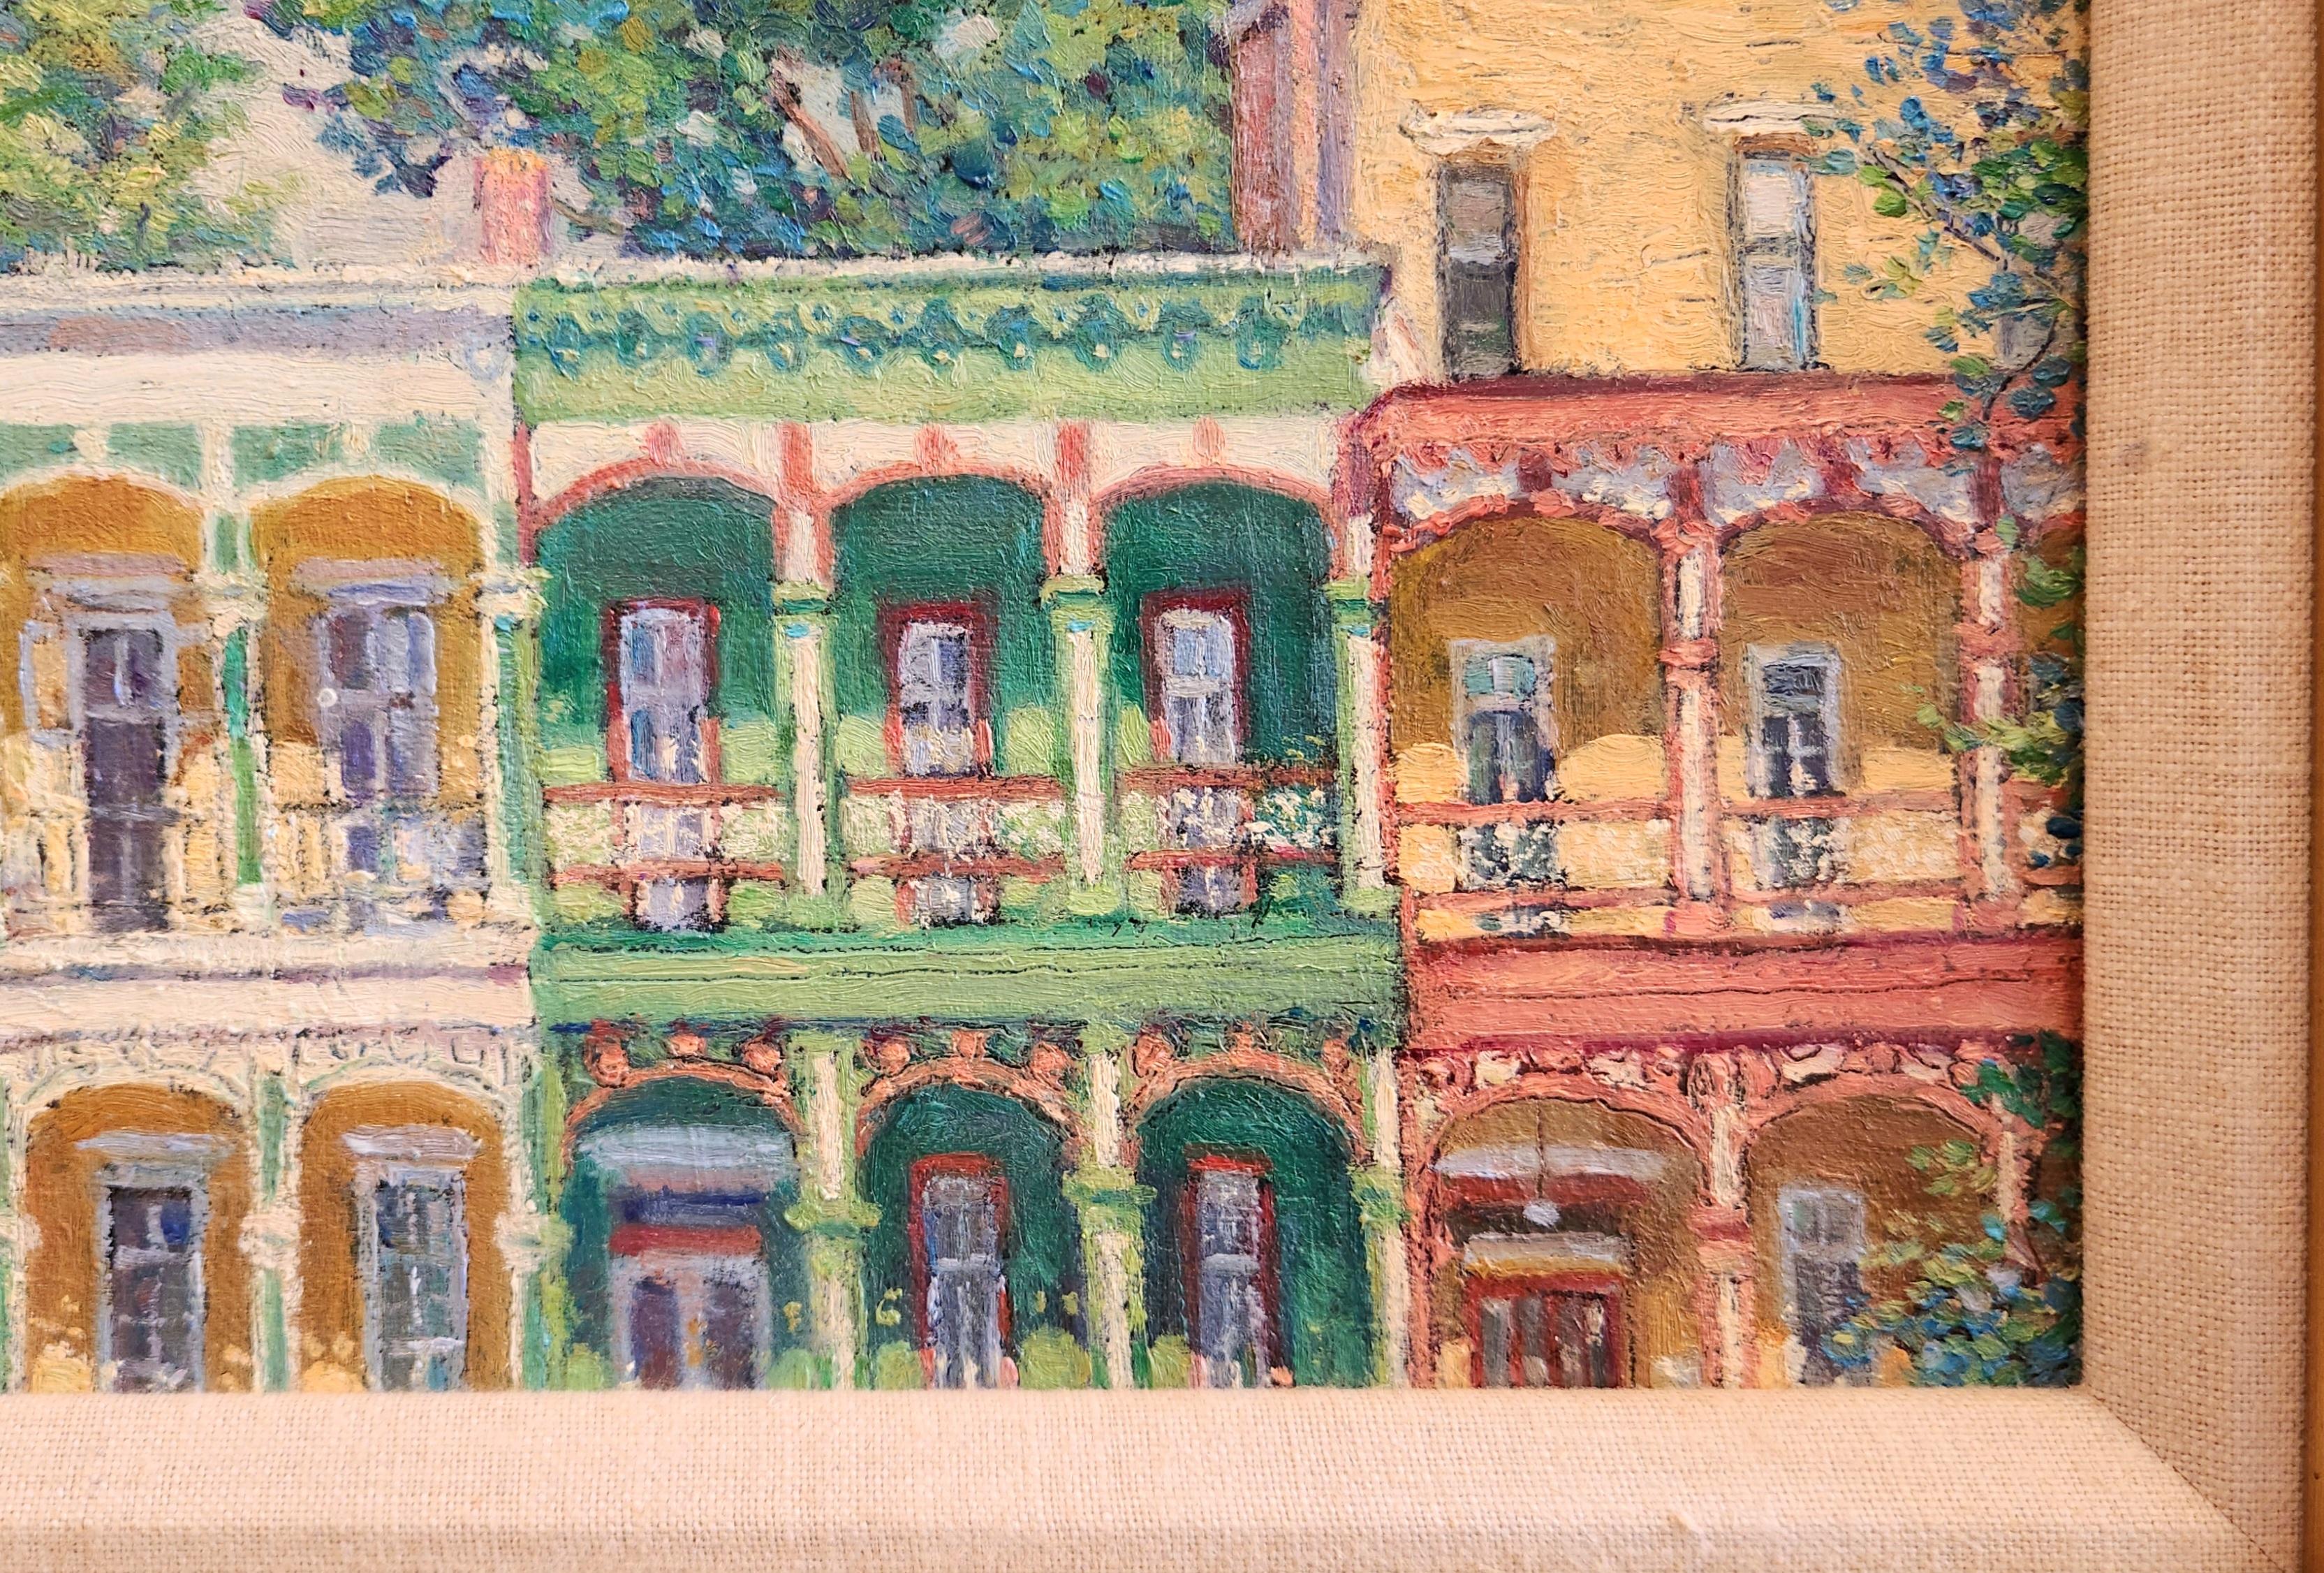 This oil on linen painting of a group of three colorful row houses provides a unique slice of the urban landscape in Albany, NY. The highly detailed houses show open porches, startling for the cold Upstate NY weather, but typical of this corner of